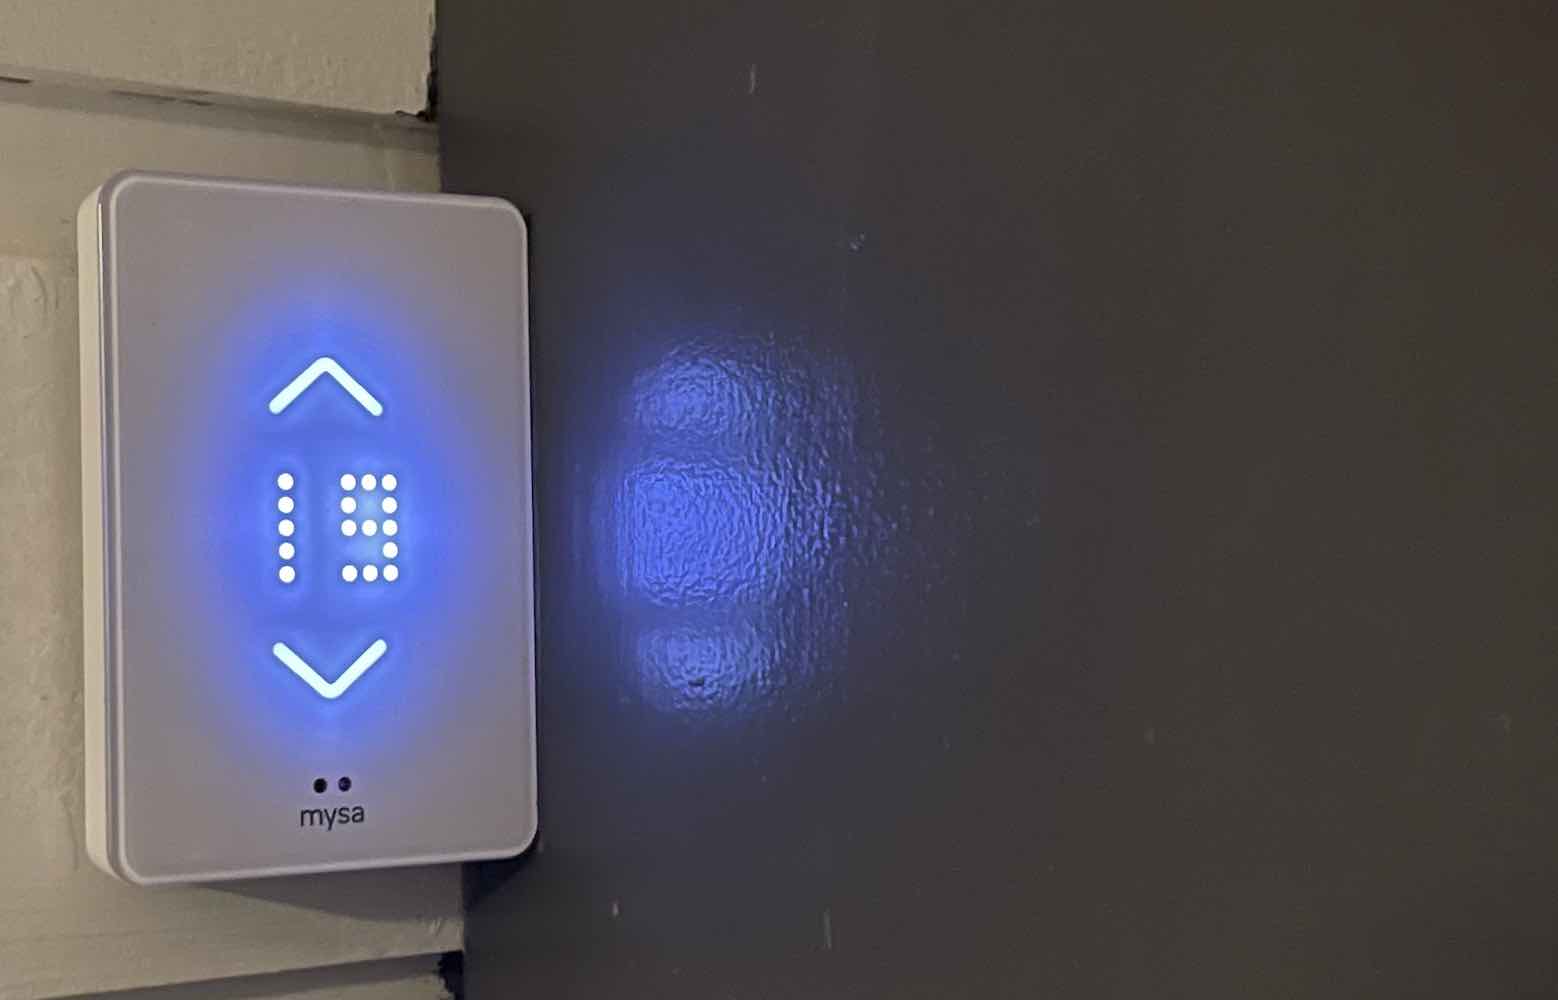 How To Install Mysa Smart Thermostat